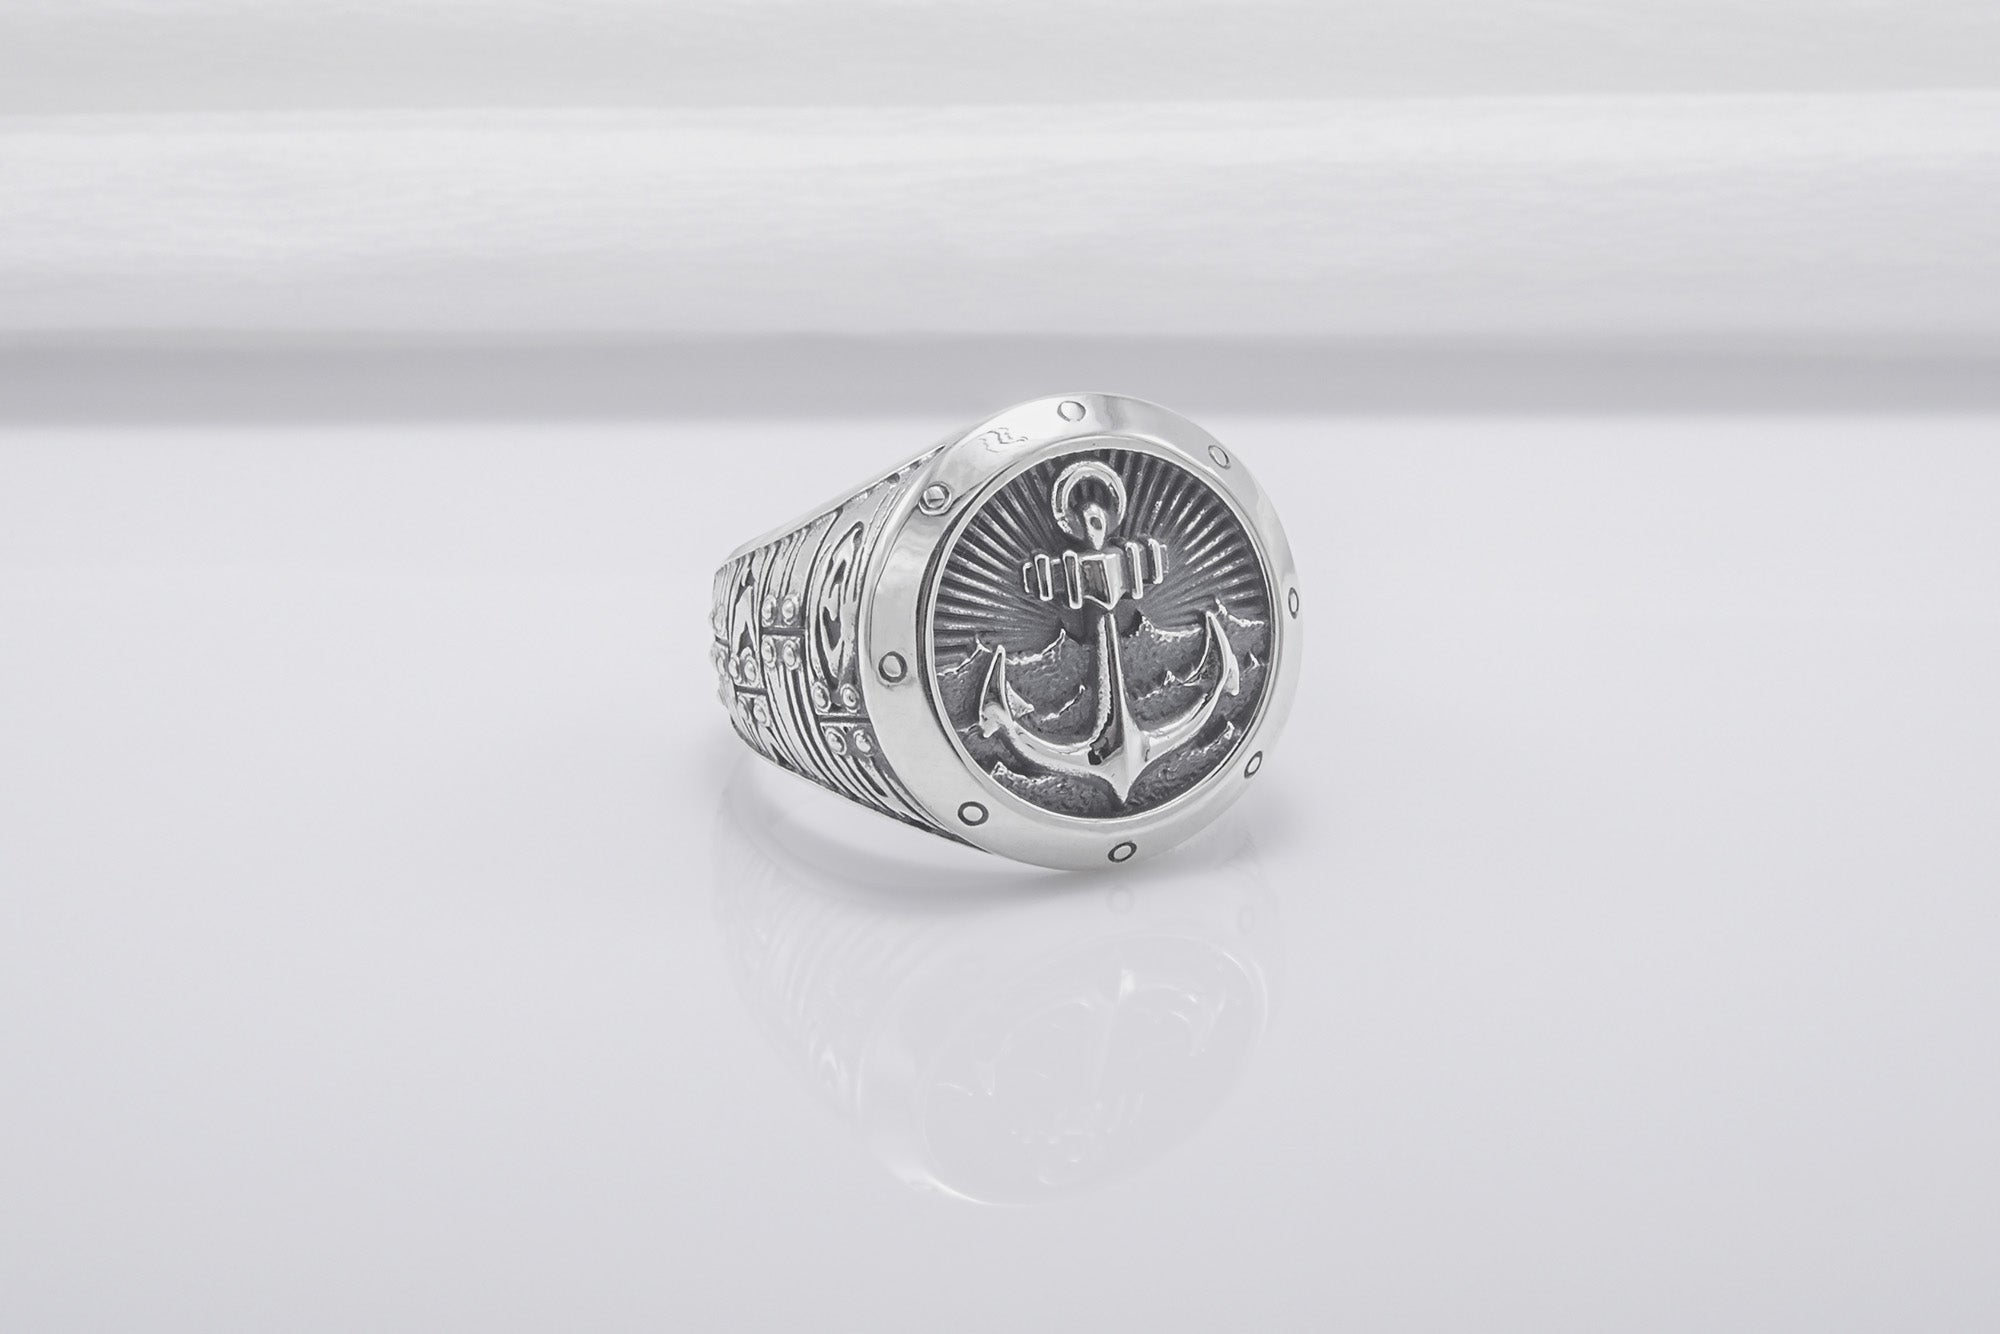 Handmade 925 Silver Ring With Anchor And Sea, Handcrafted Jewelry - vikingworkshop